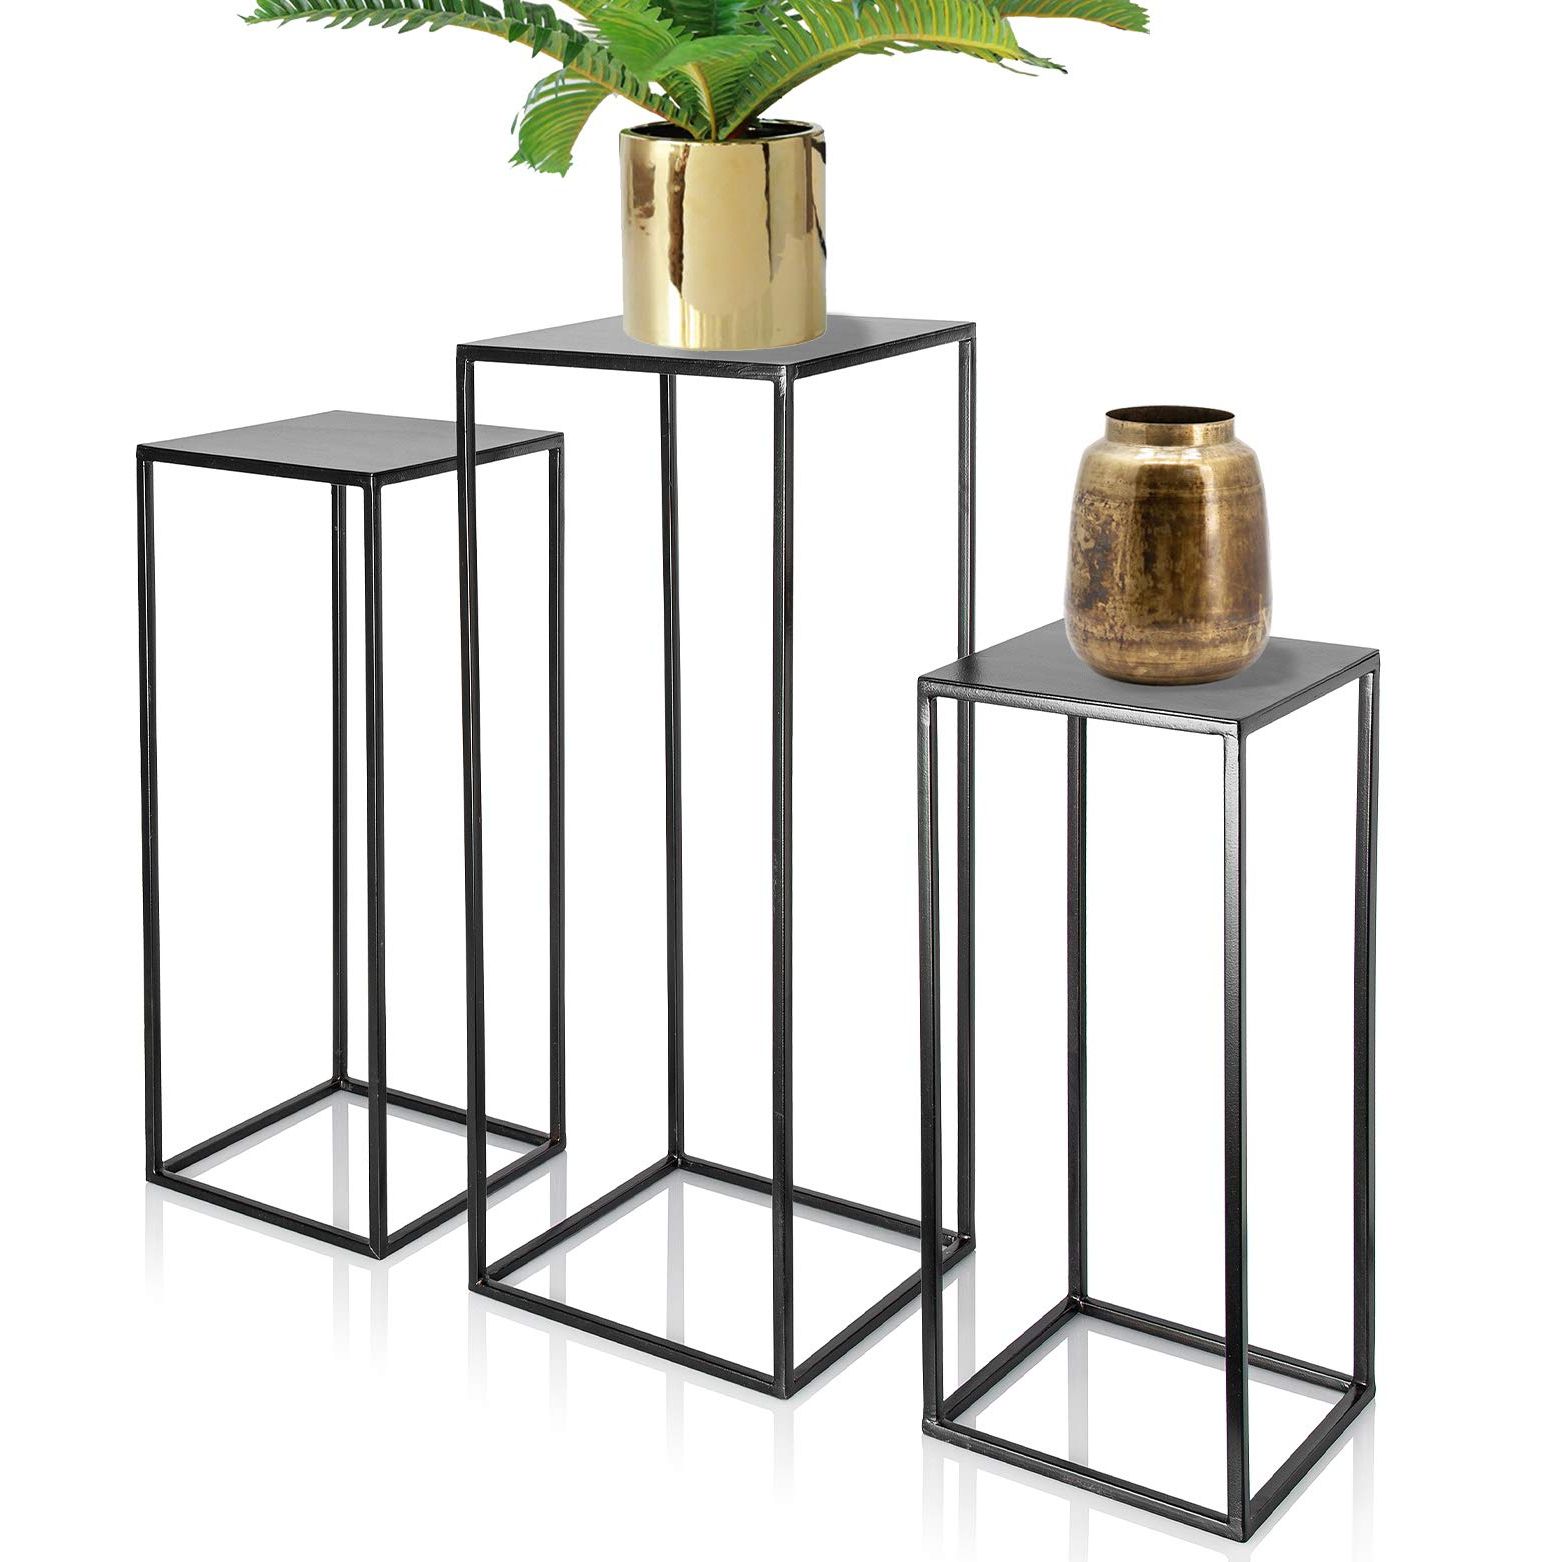 2019 Iron Square Plant Stands Pertaining To Amazon: Kimisty Set Of 3 Metal Pedestal Plant Stand, Nesting Display  Accent End Table, High Square Rack Flower Holder, Black Corner Planter Pot  Rack, Tall Tiered Decor, Modern Decorative Wedding Stand : (View 1 of 15)